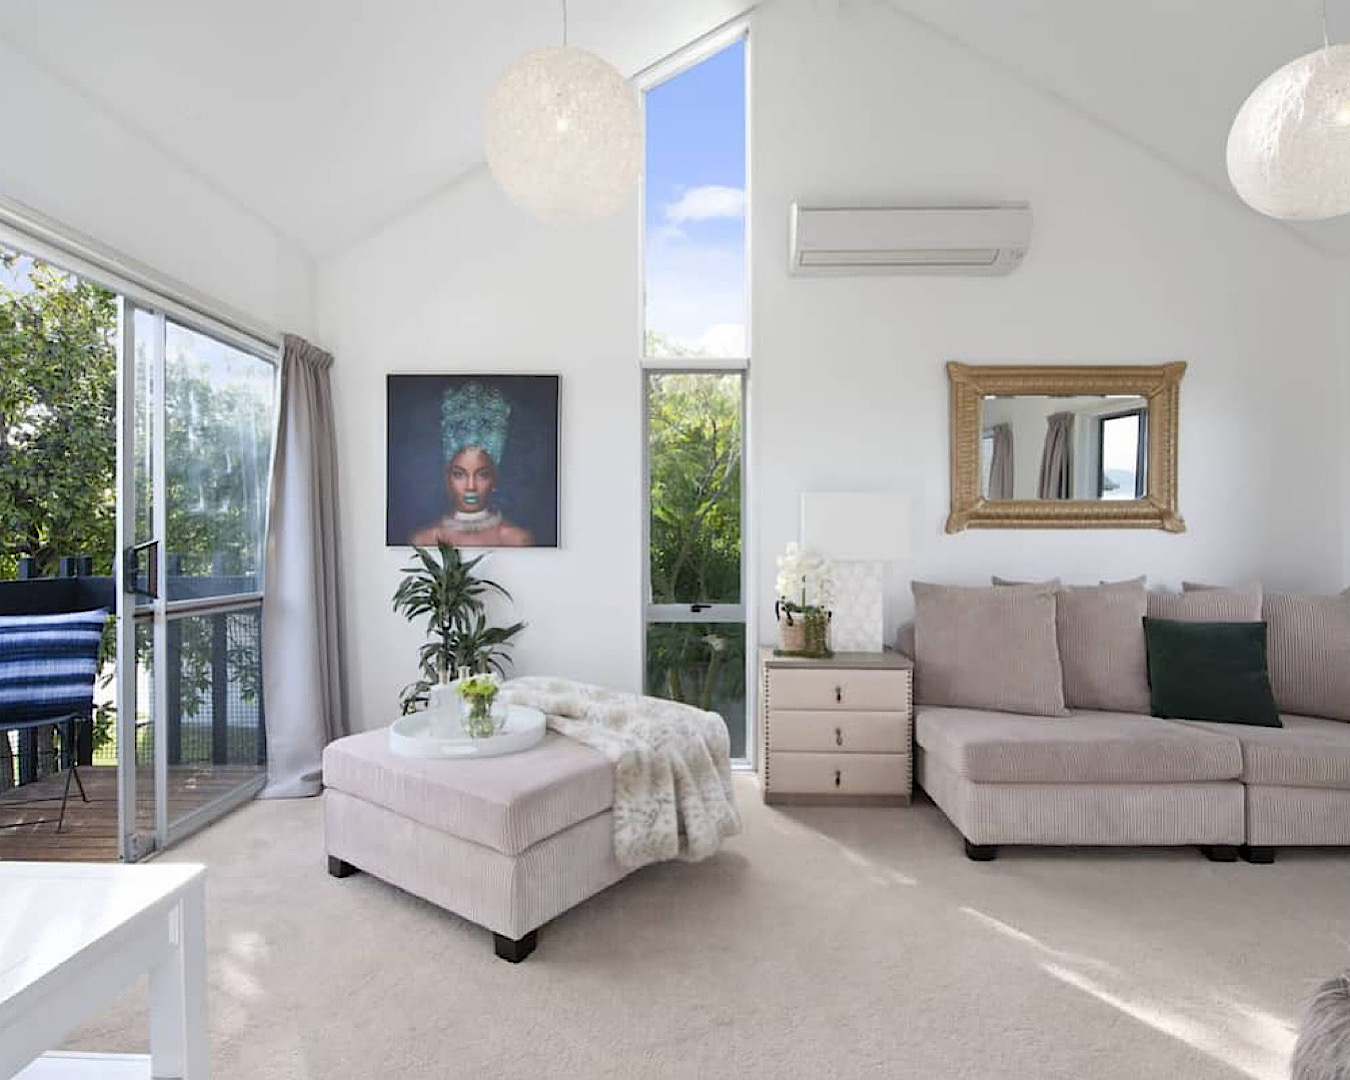 A more minimalist-style accommodation and one of the best Airbnbs in Taupō.